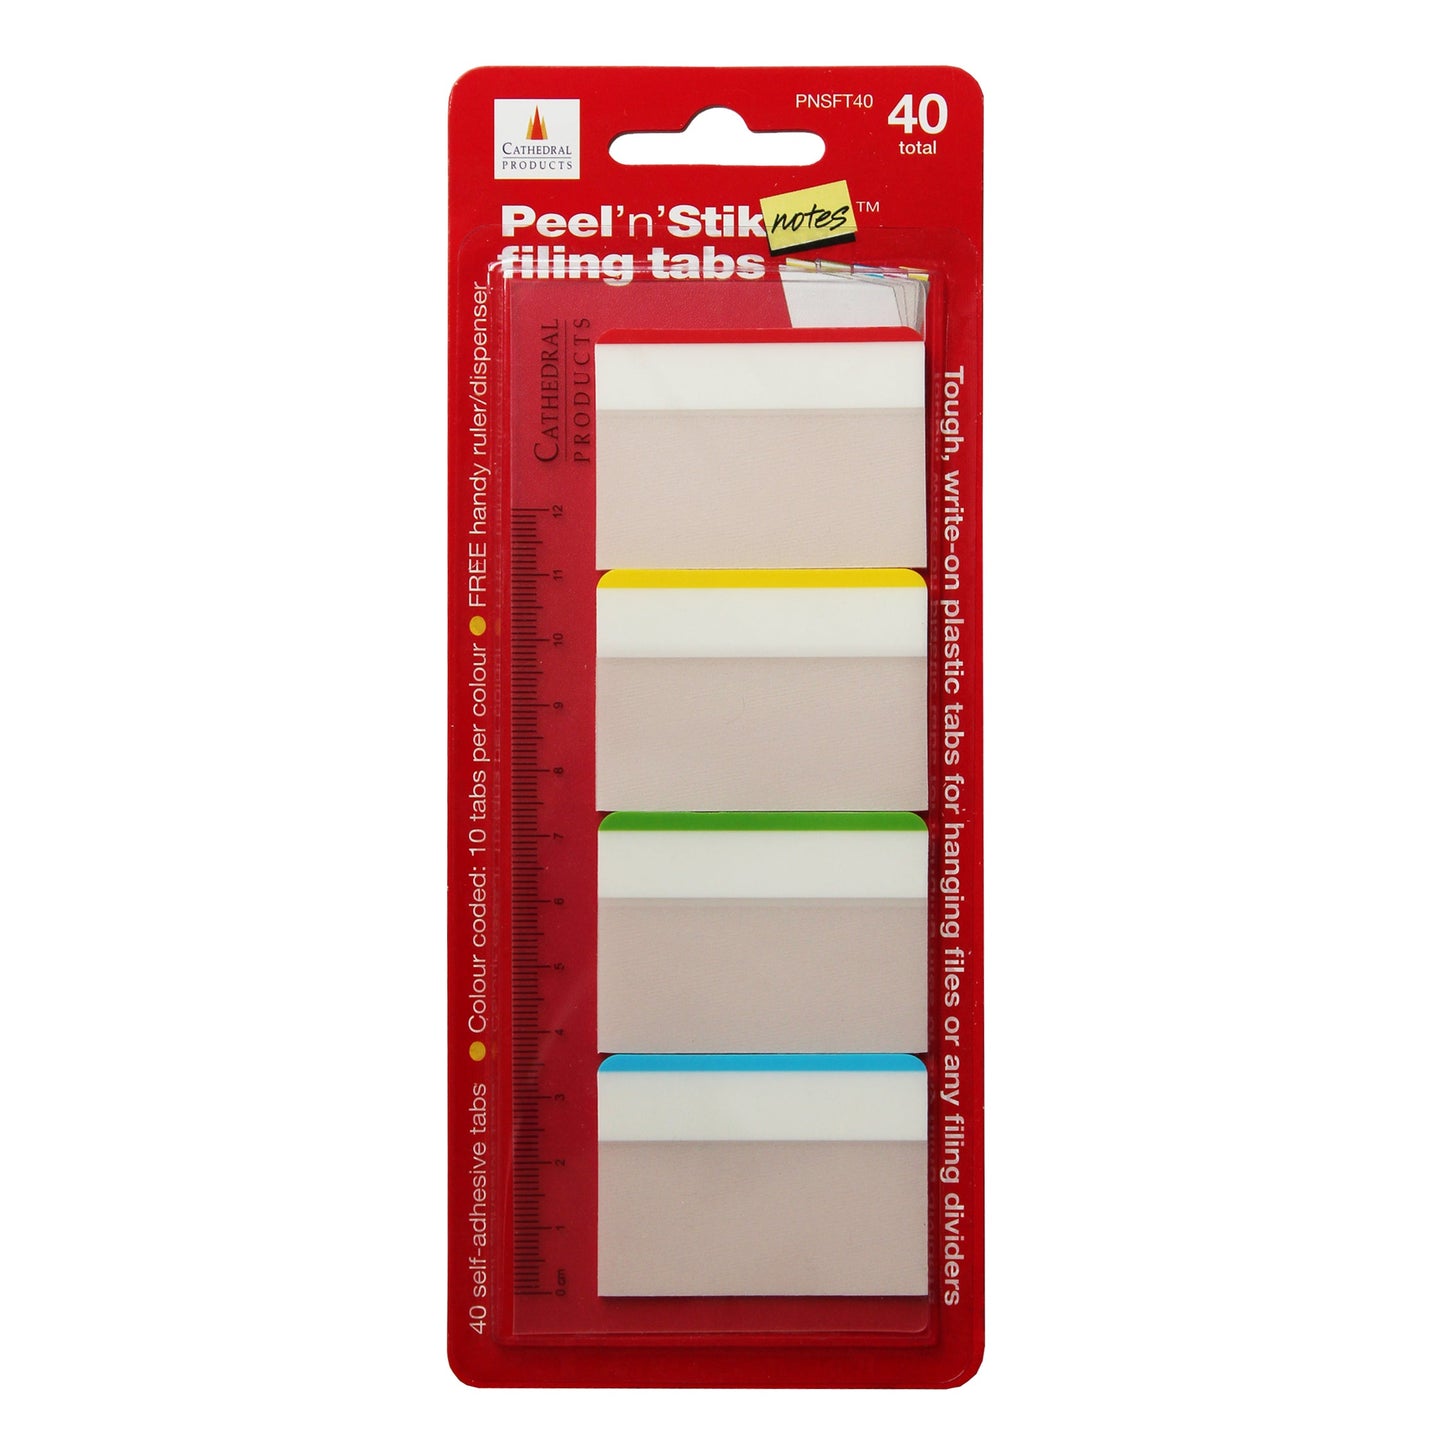 Pack of Cathedral Products Peel’n’Stick notes filing tabs, 37mm x 50mm, with a set of 40 color-coded, repositionable tabs. The packaging includes a built-in ruler and advertises the tabs as 'tough, write-on, plastic tabs for hanging files or ring binders'.